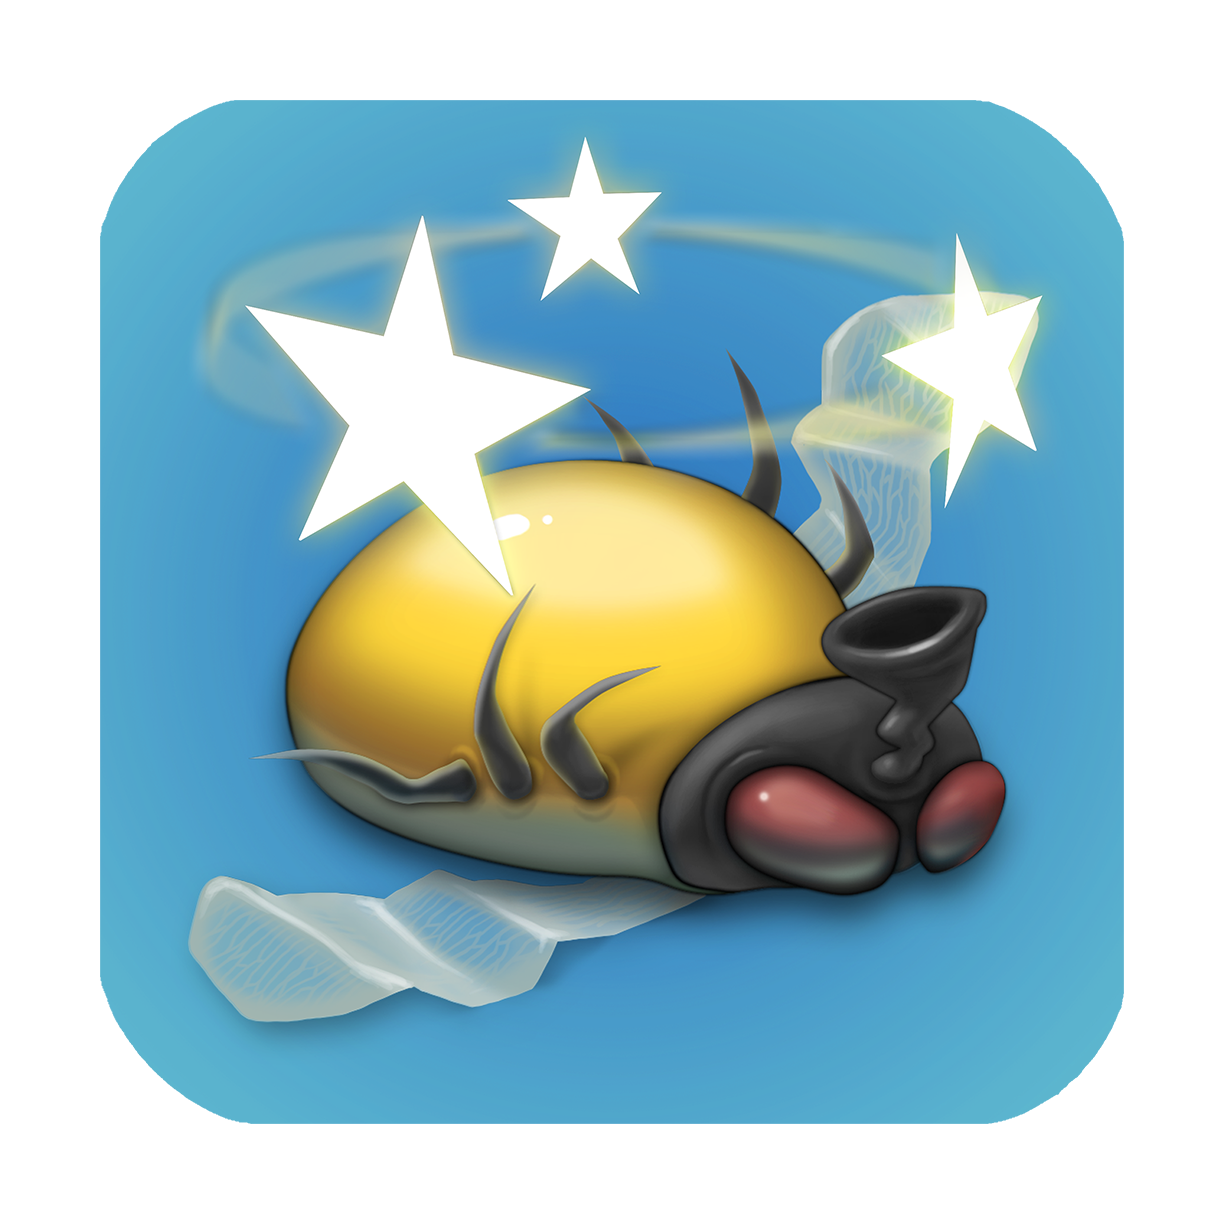 ZuZuZu icon. The game for iOS and Android.